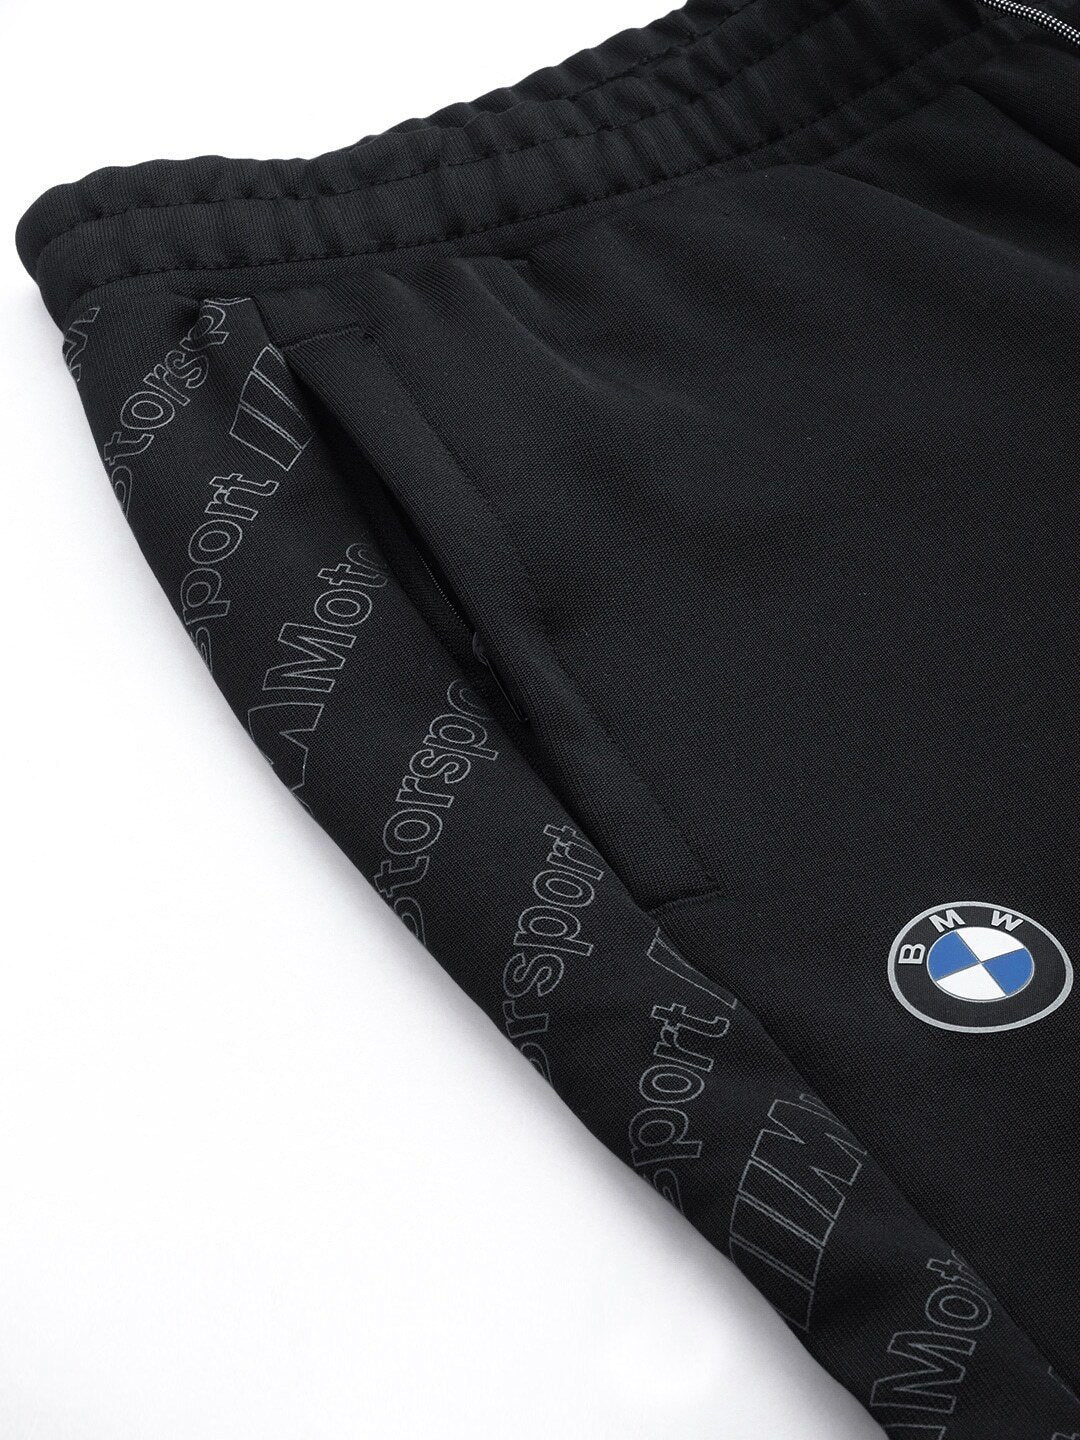 Men Black Straight Fit BMW MMS T7 Solid Track Pants with Printed Detailing - Discount Store